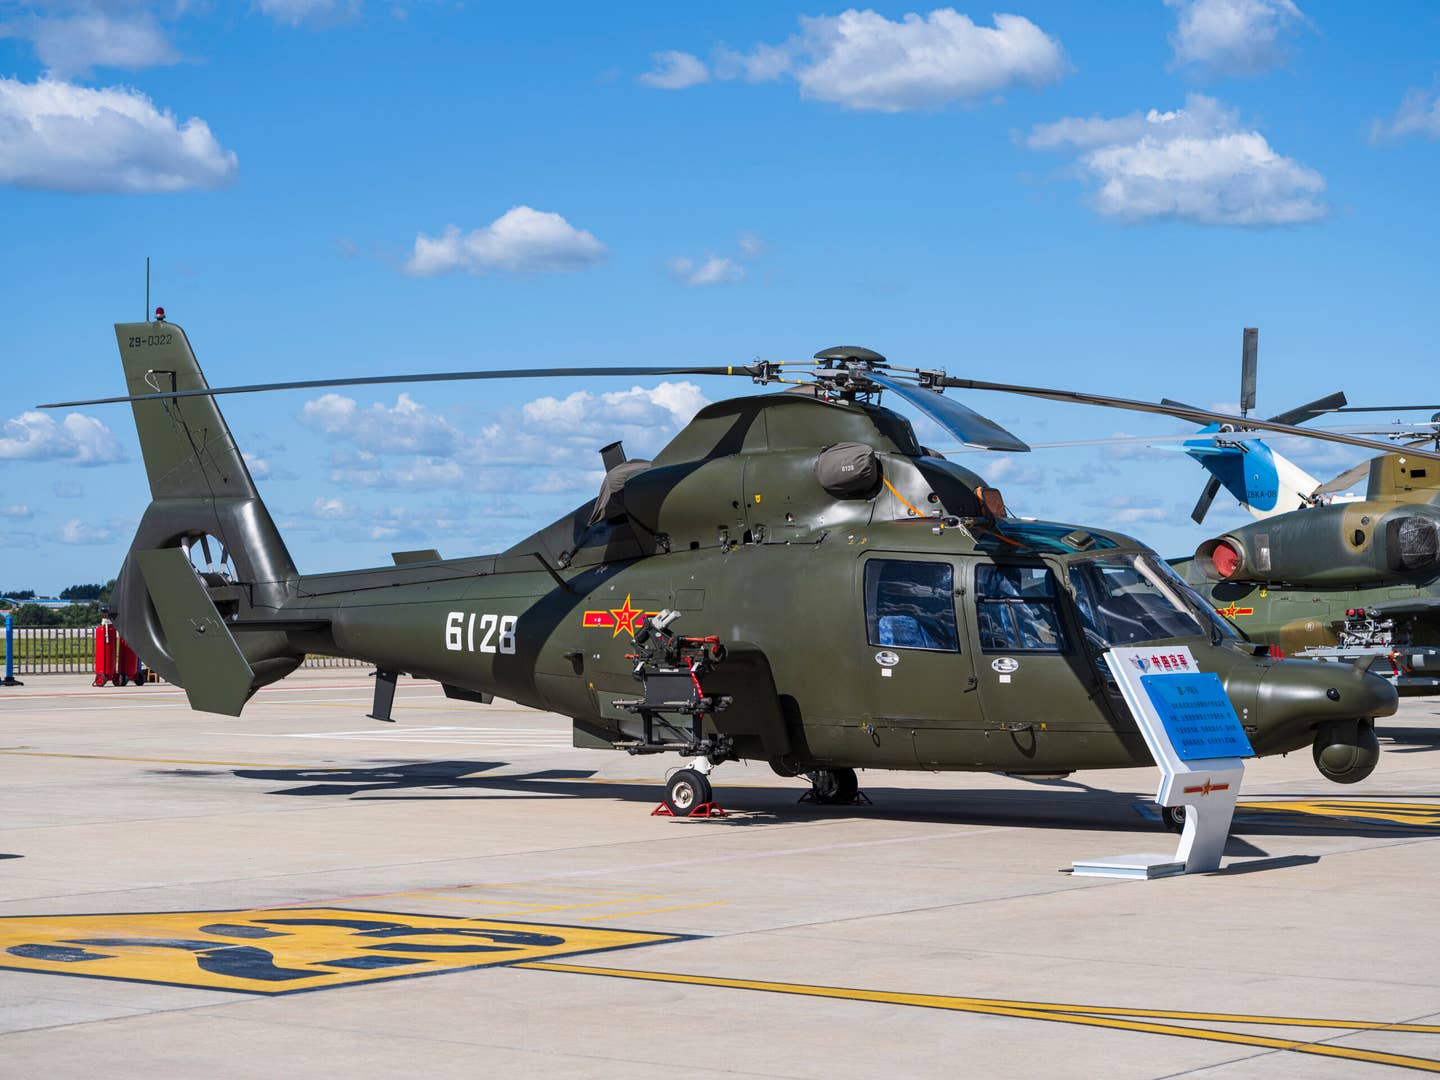 A Z-9WA attack helicopter on static display ahead of the Changchun Air Show in August 2022 in Changchun, Jilin Province of China. <em>Photo by Sun Lin/VCG via Getty Images</em>